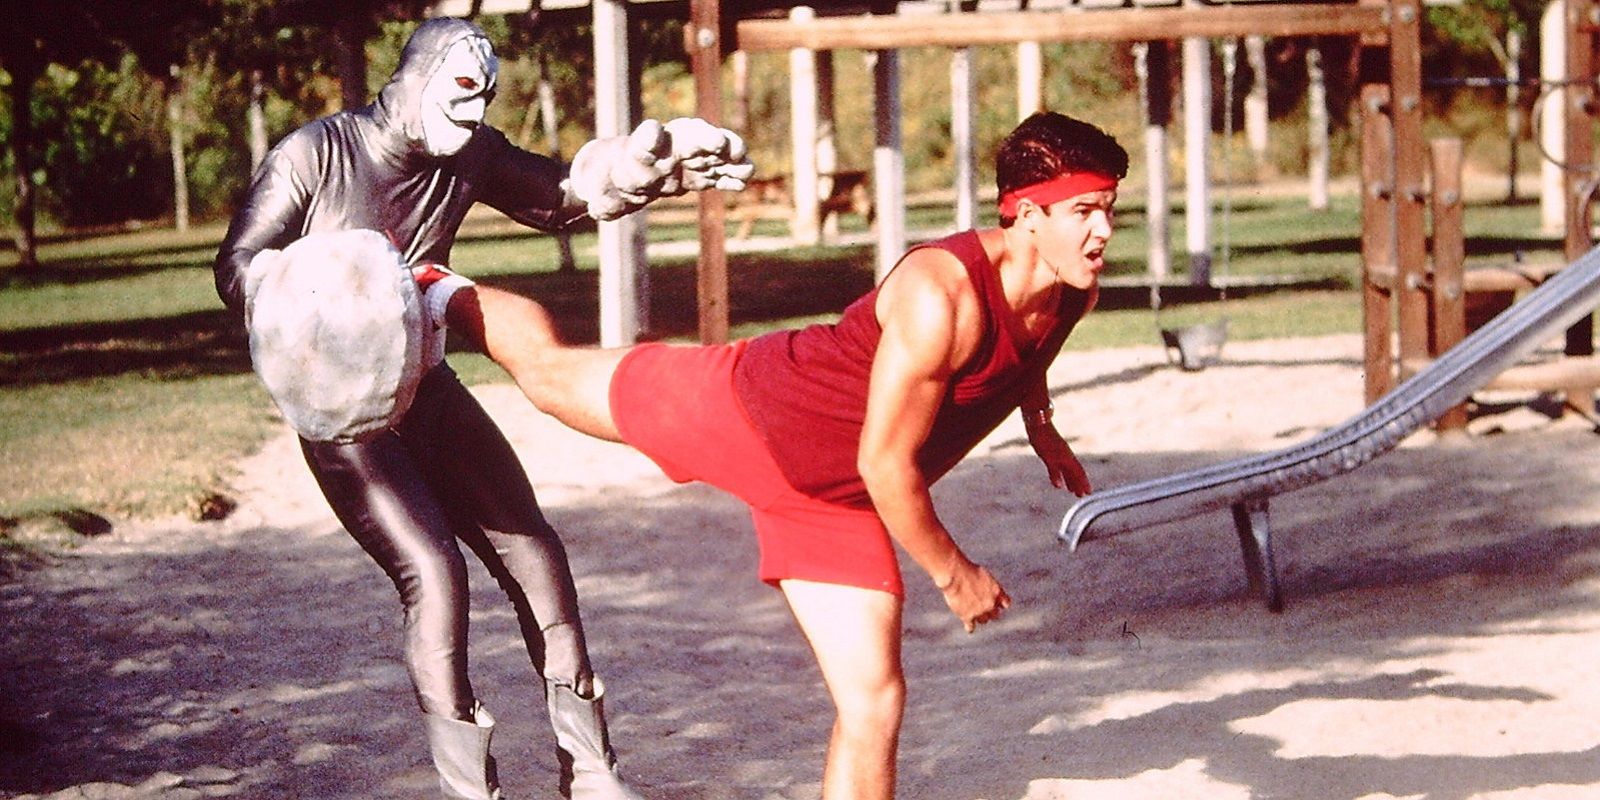 Classic Power Rangers Moments We Definitely Wont See in The Movie